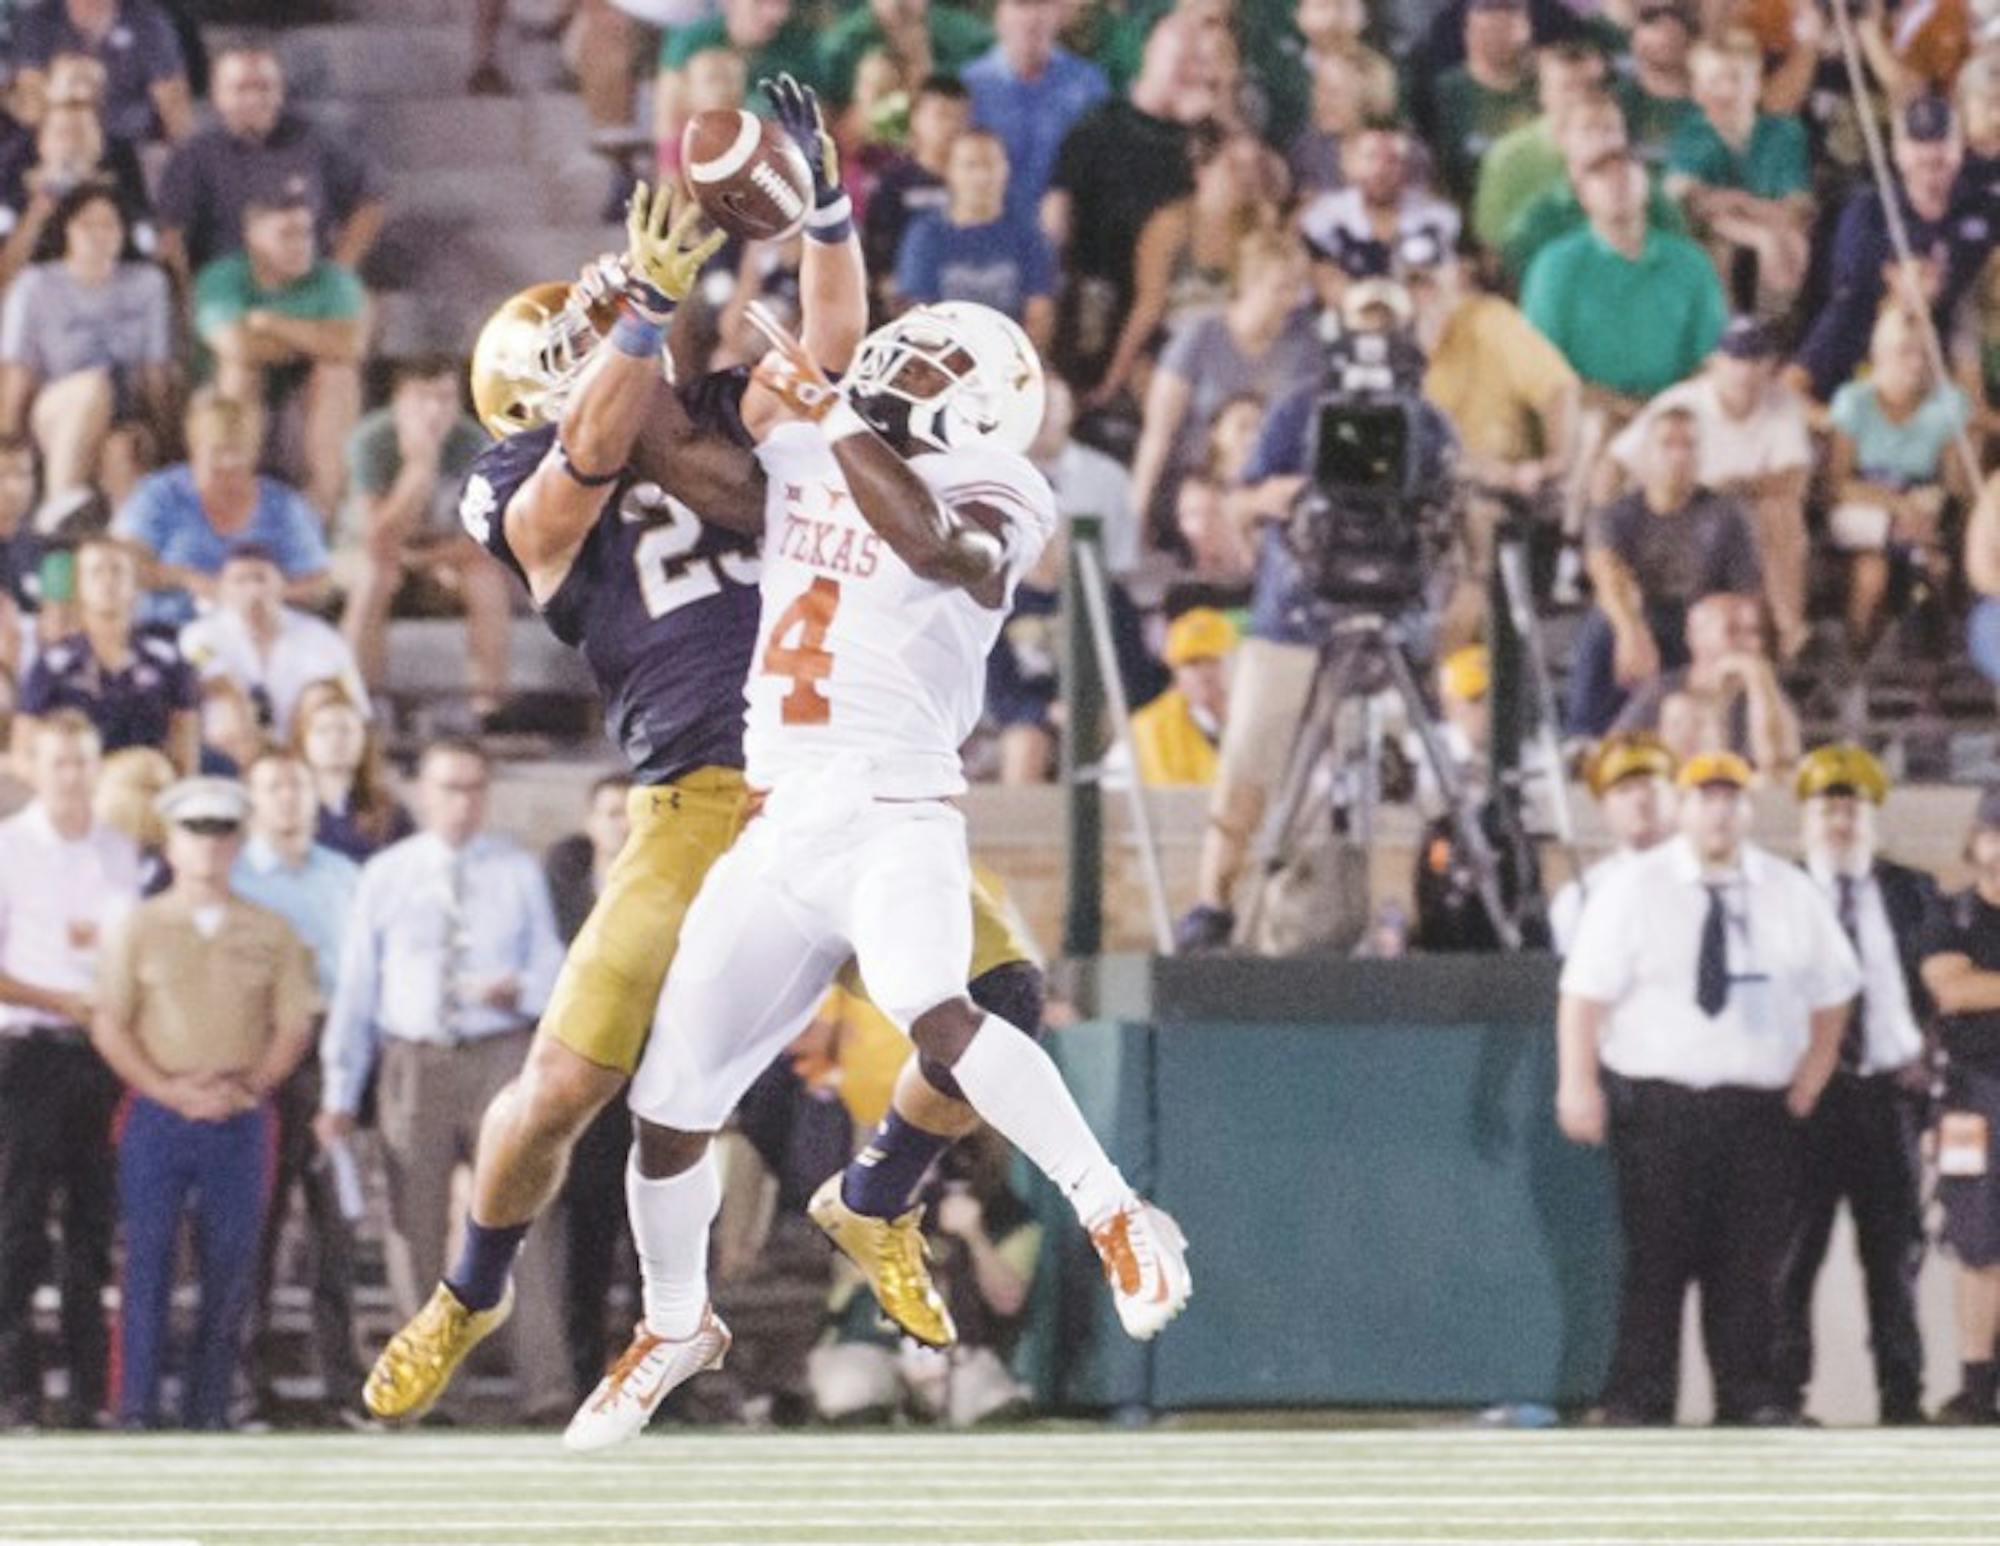 Irish junior safety Drue Tranquill contests a pass during Notre Dame’s 38-3 win last season over Texas. Tranquill tore his ACL two weeks later against Georgia Tech but enters 2016 as the starter at strong safety.